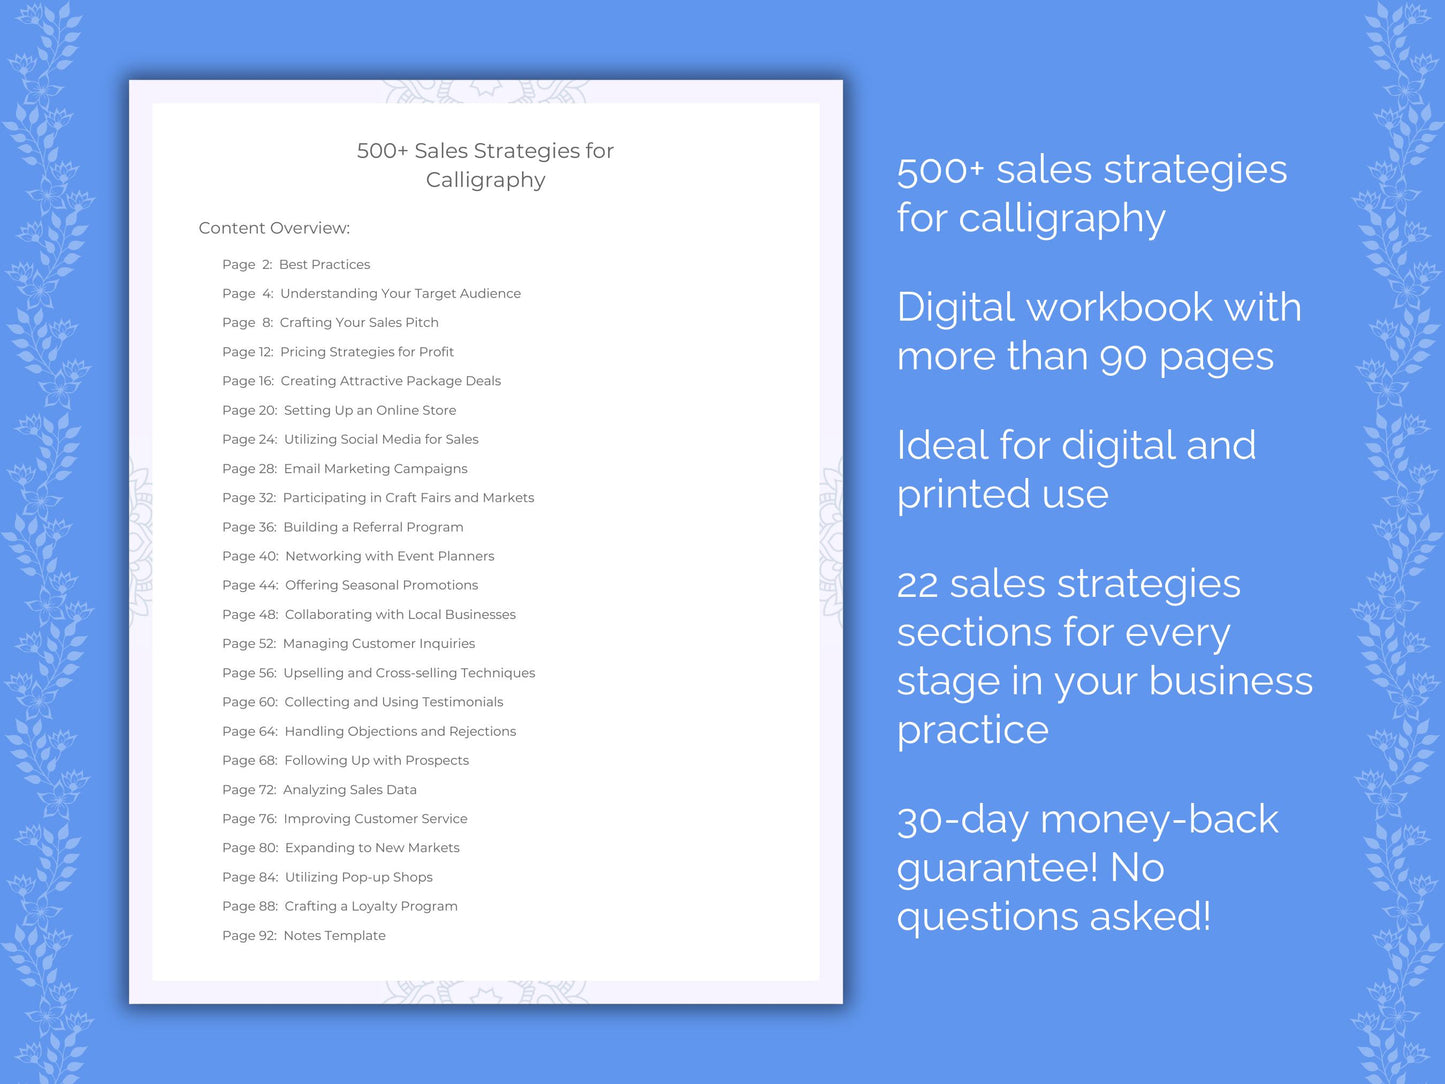 Calligraphy Business Resource